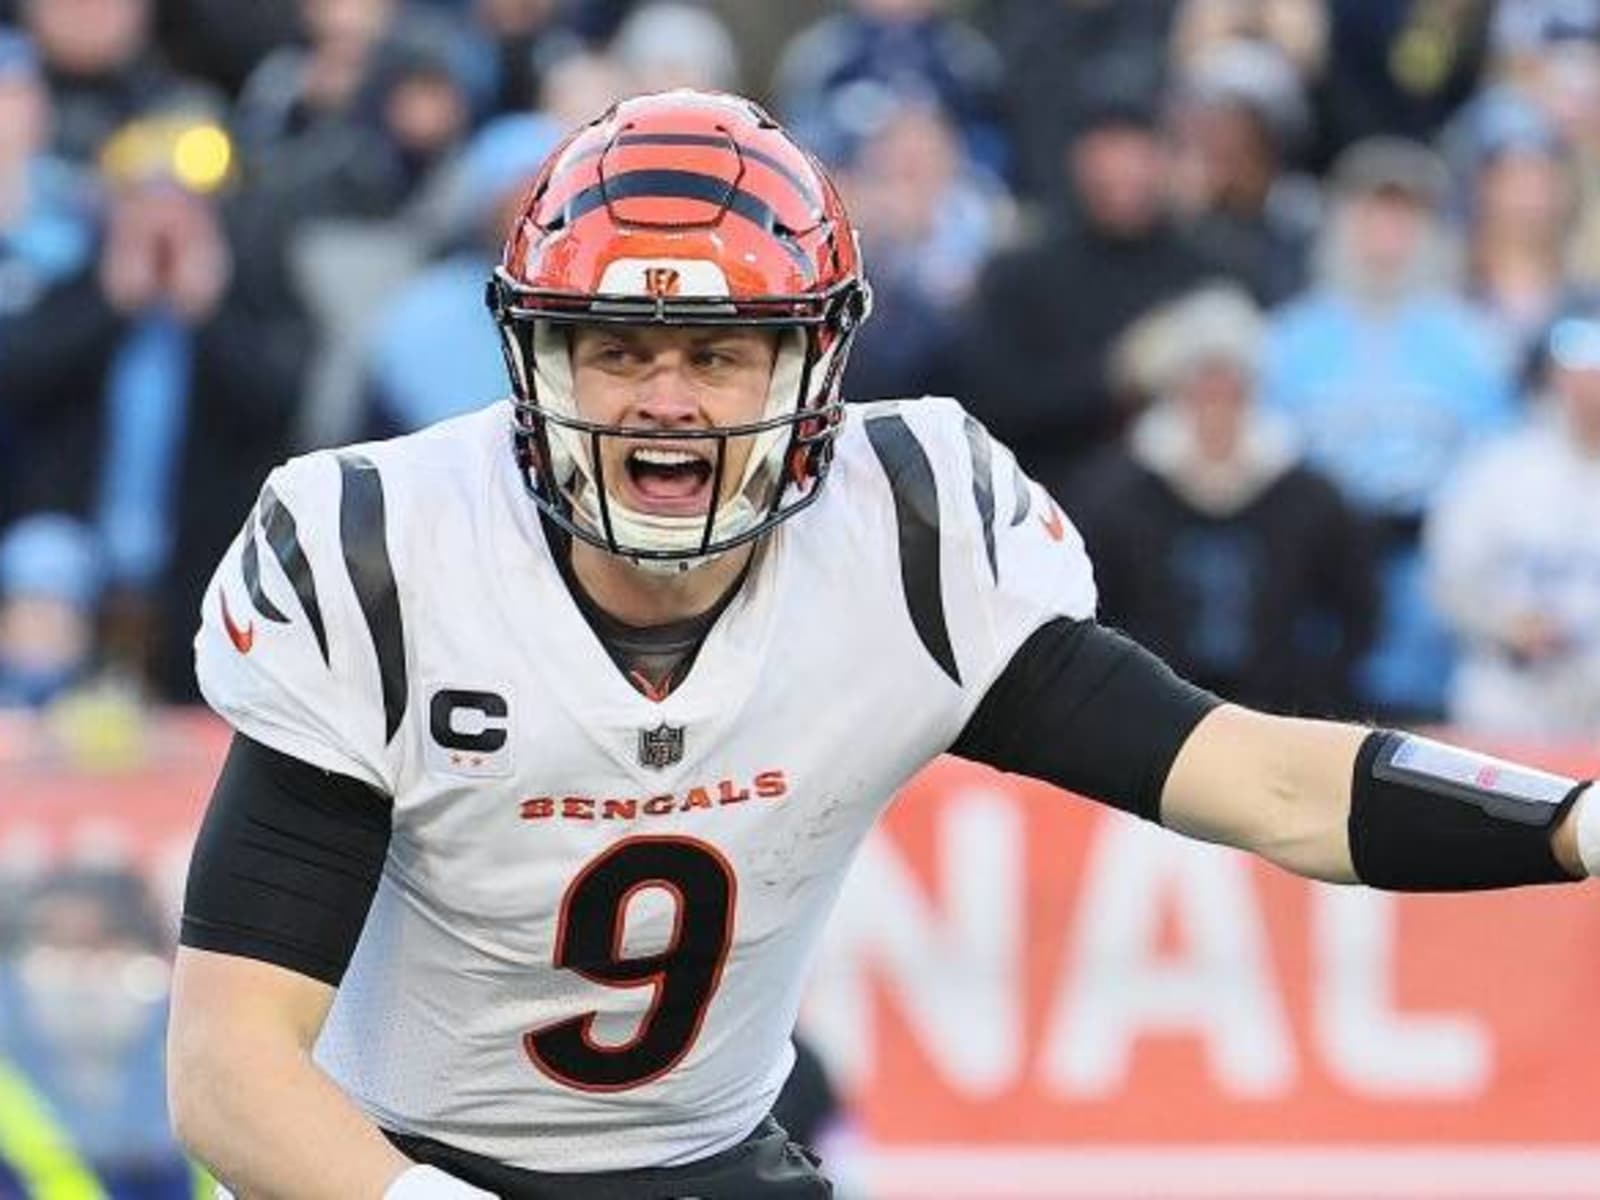 Browns hold Joe Burrow to under 100 yards passing and stun Bengals